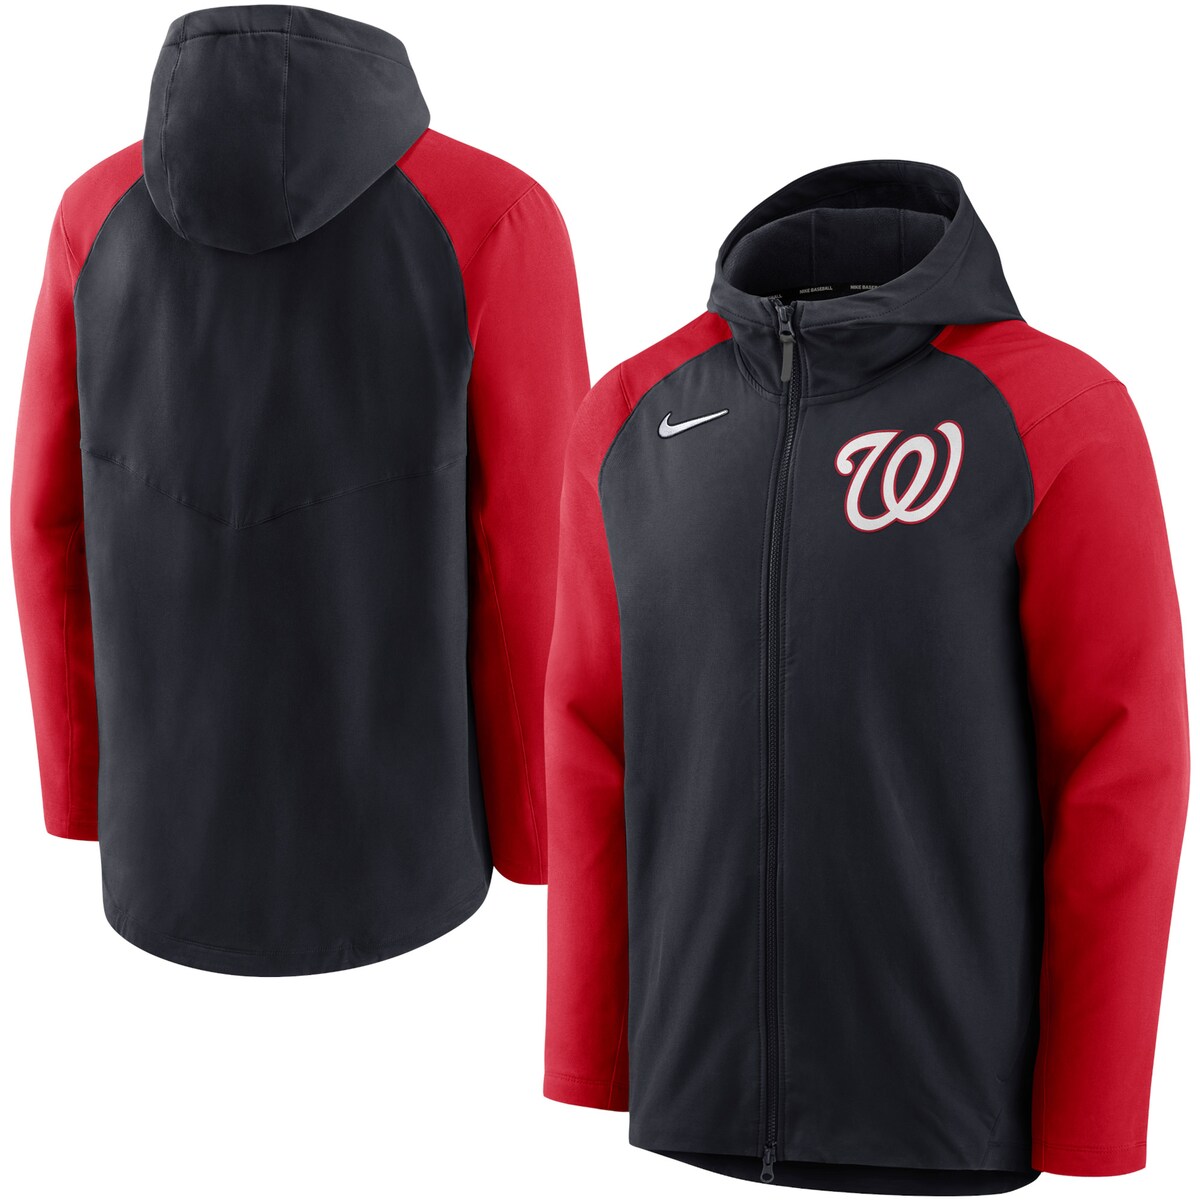 MLB iViY tWbvAbv p[J[ Nike iCL Y lCr[ (Men's Nike Authentic Collection Player Therma Full Zip Jacke)